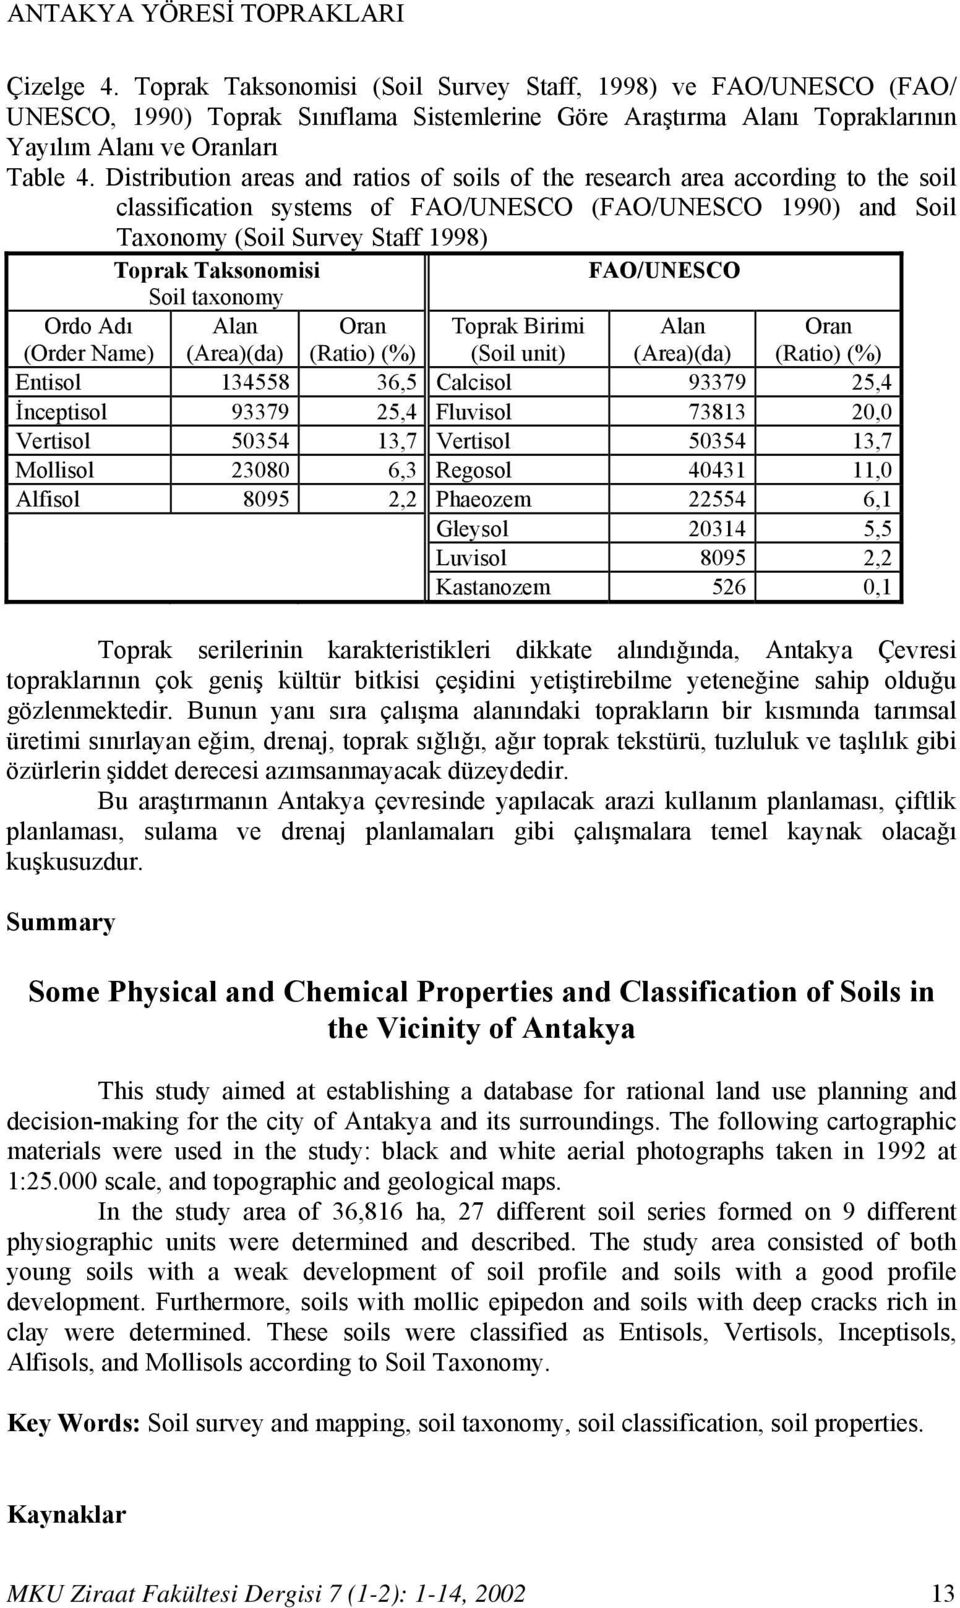 Distribution areas and ratios of soils of the research area according to the soil classification systems of FAO/UNESCO (FAO/UNESCO 1990) and Soil Taxonomy (Soil Survey Staff 1998) Toprak Taksonomisi